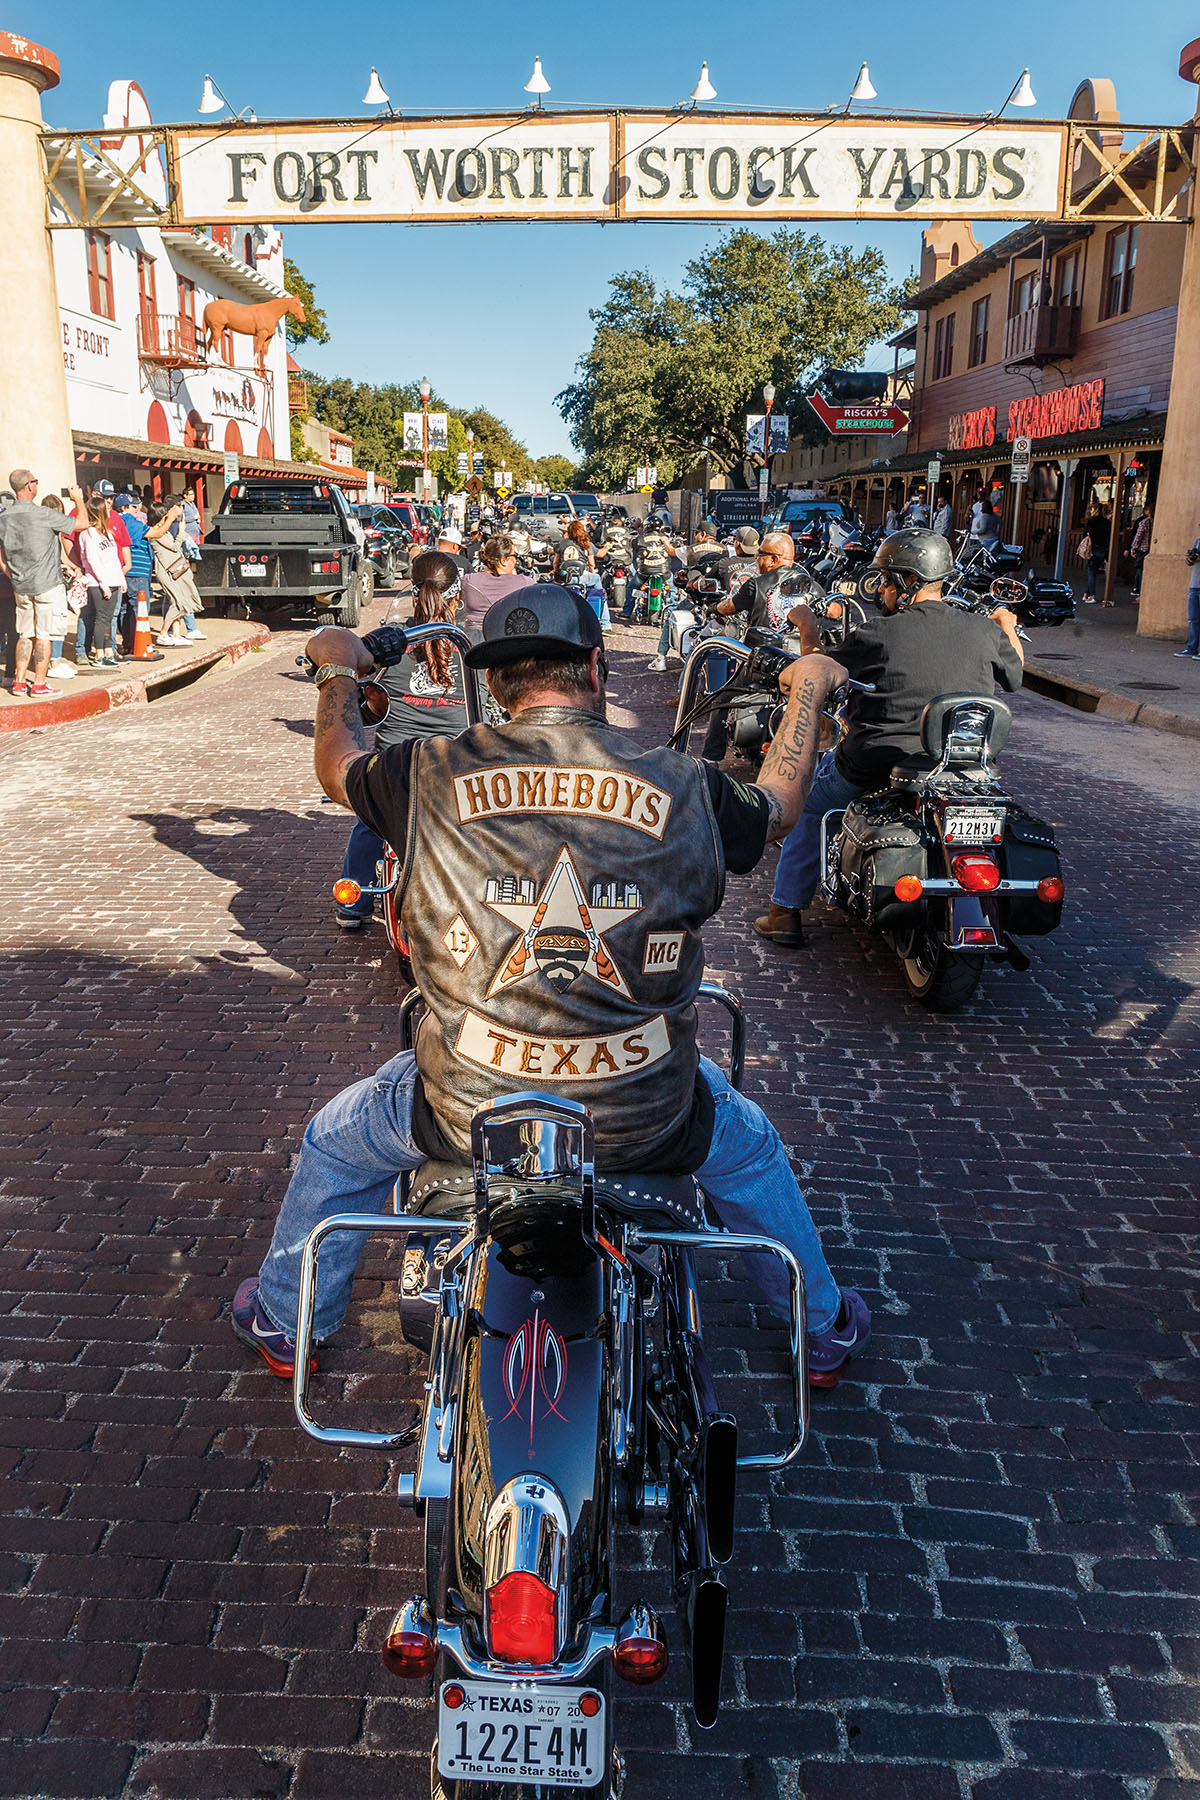 A group of motorcyclists under a banner reading "Fort Worth Stock Yards"